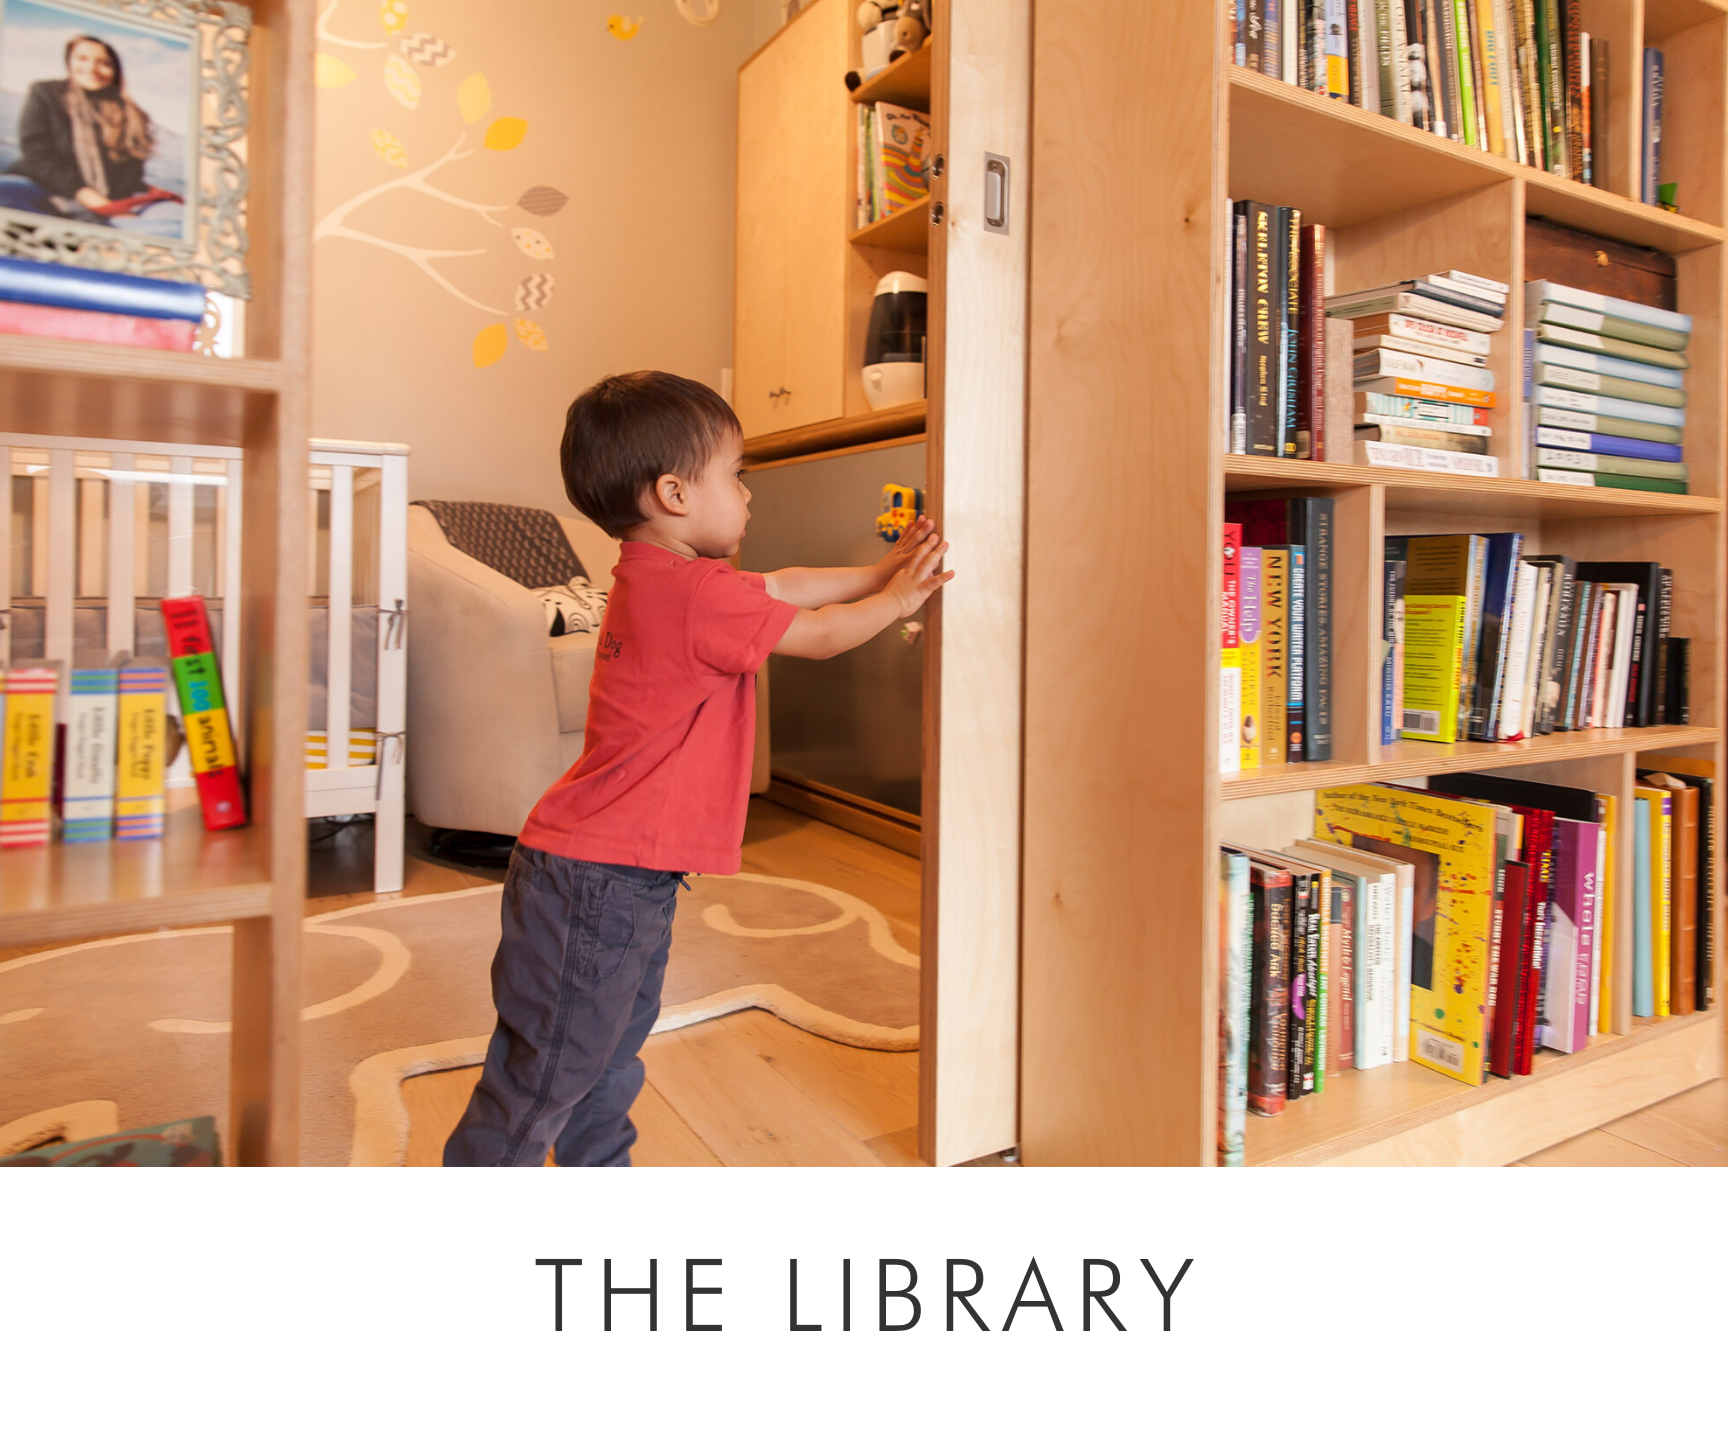 Young child reaching for a book in a cozy library with wooden shelves and a playful rug.